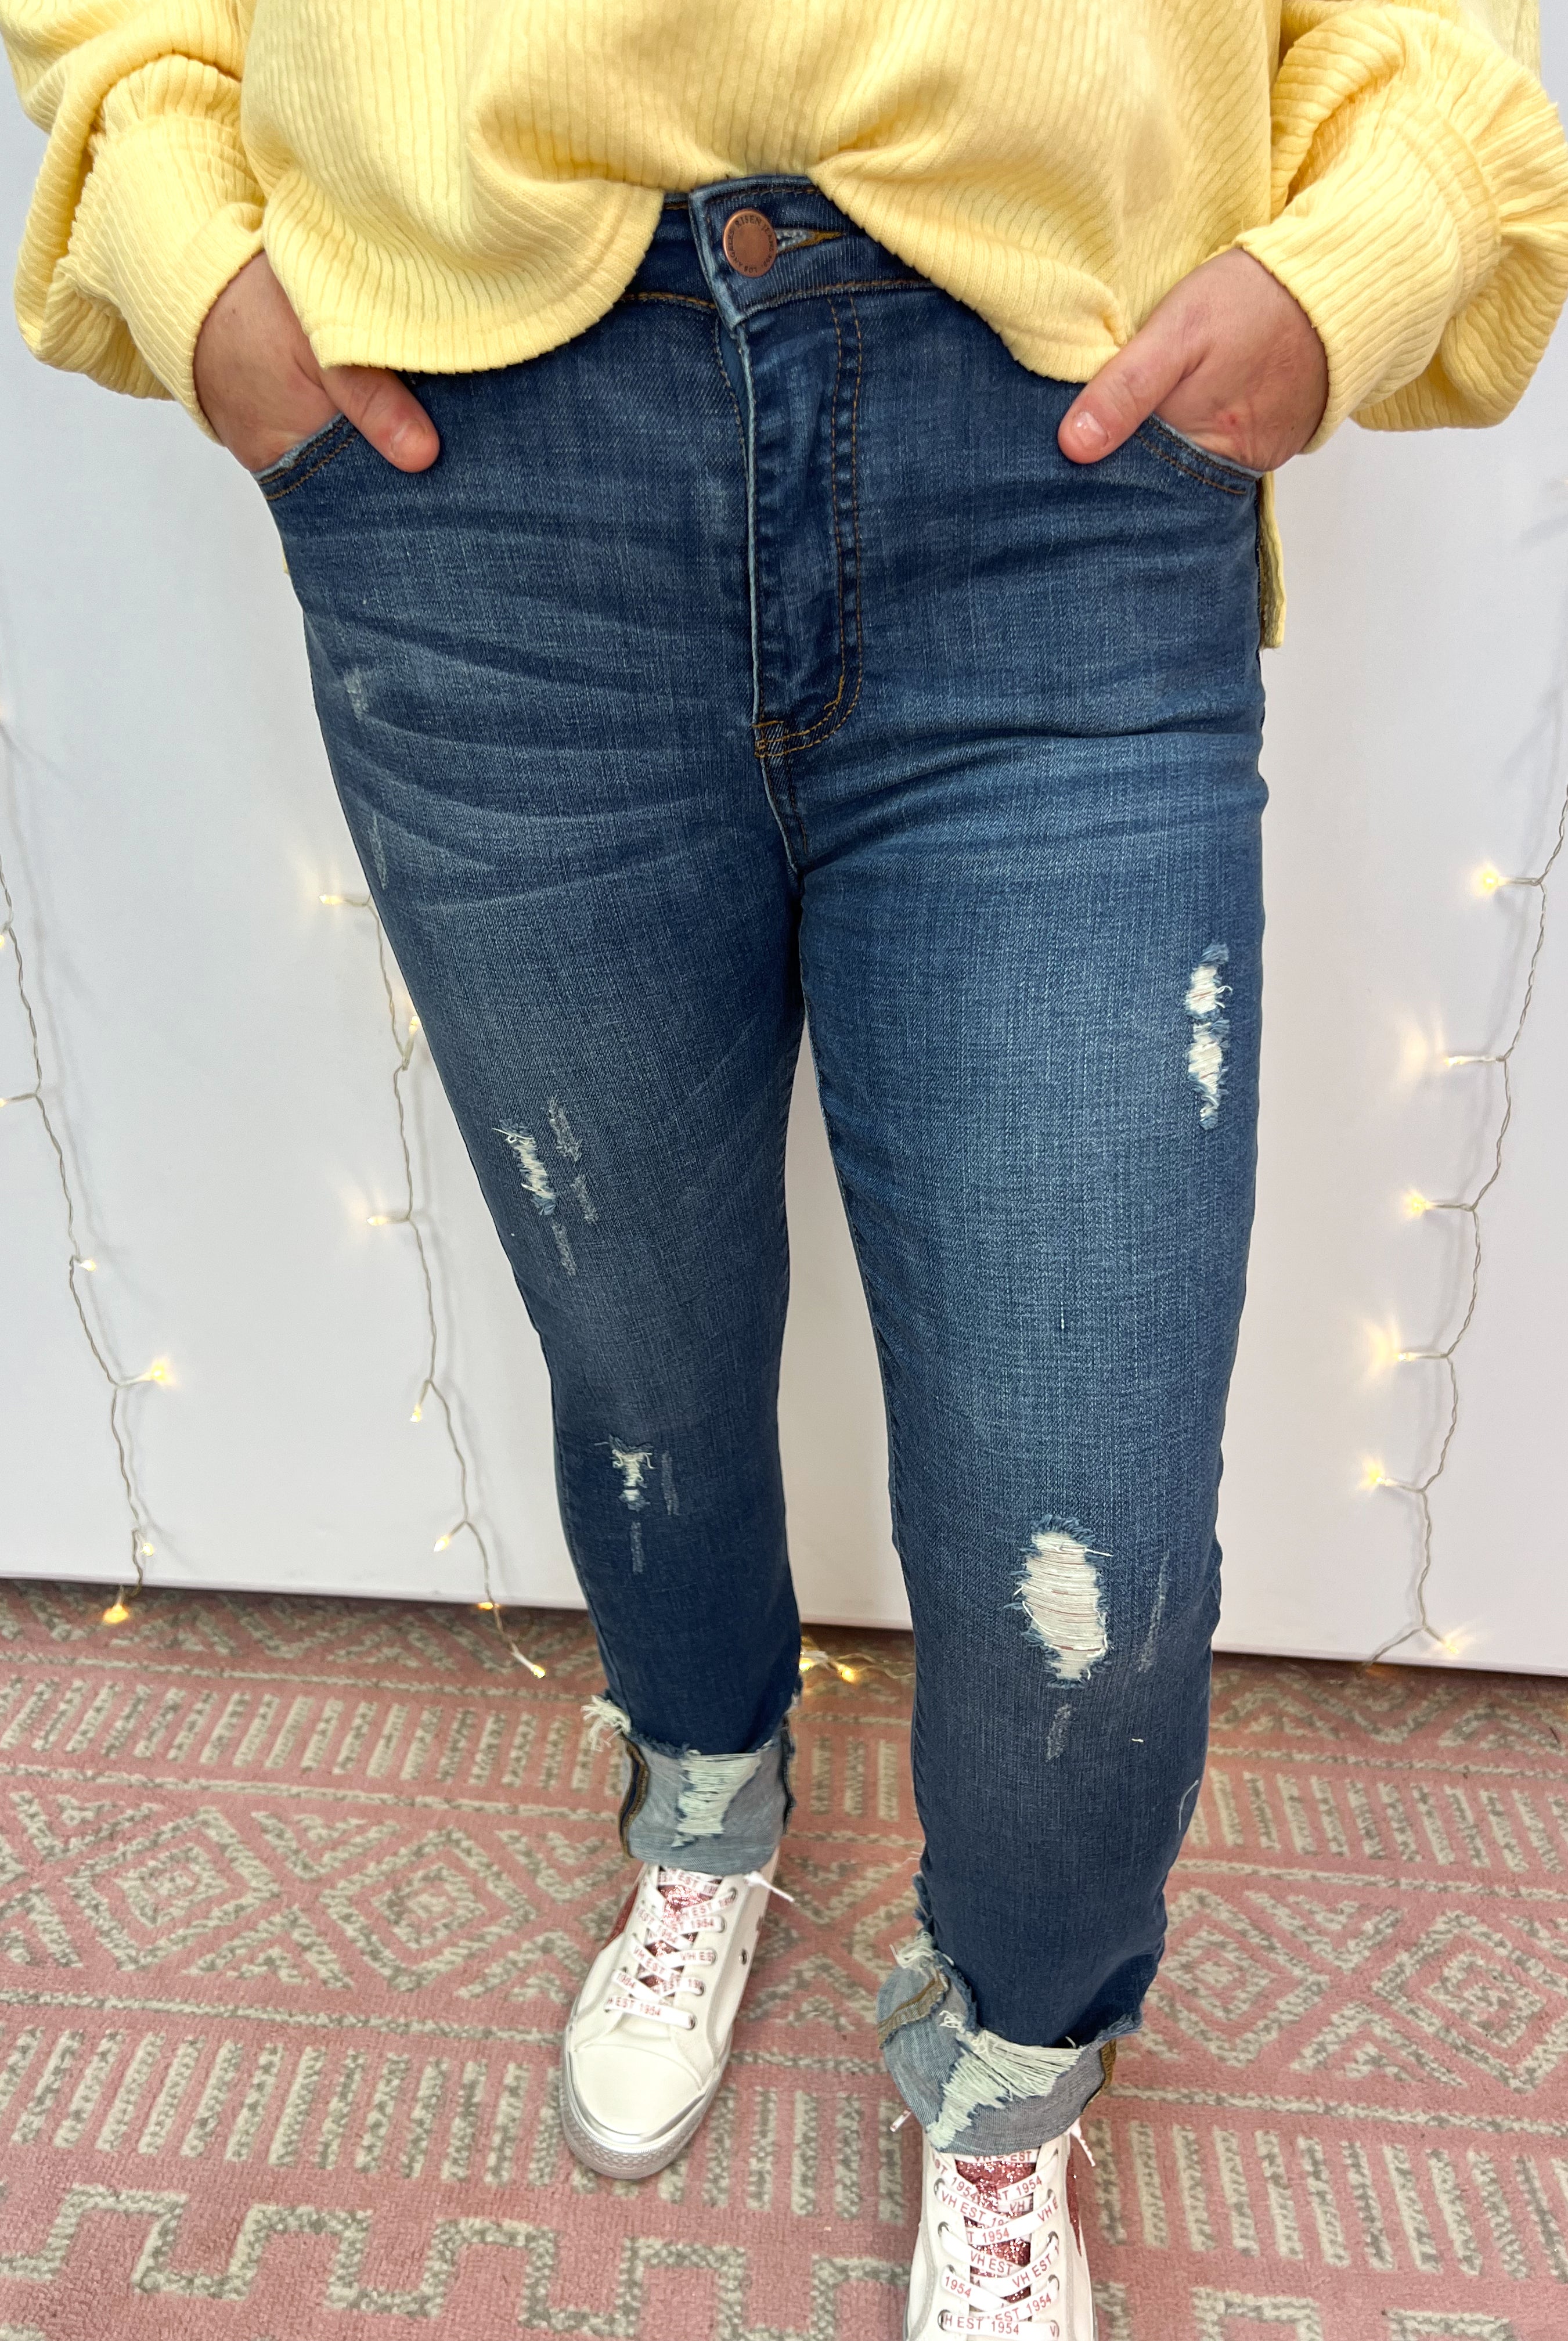 RISEN - Mid Rise Frayed Ankle Straight Jeans-Jeans-Risen-The Lovely Closet, Women's Fashion Boutique in Alexandria, KY